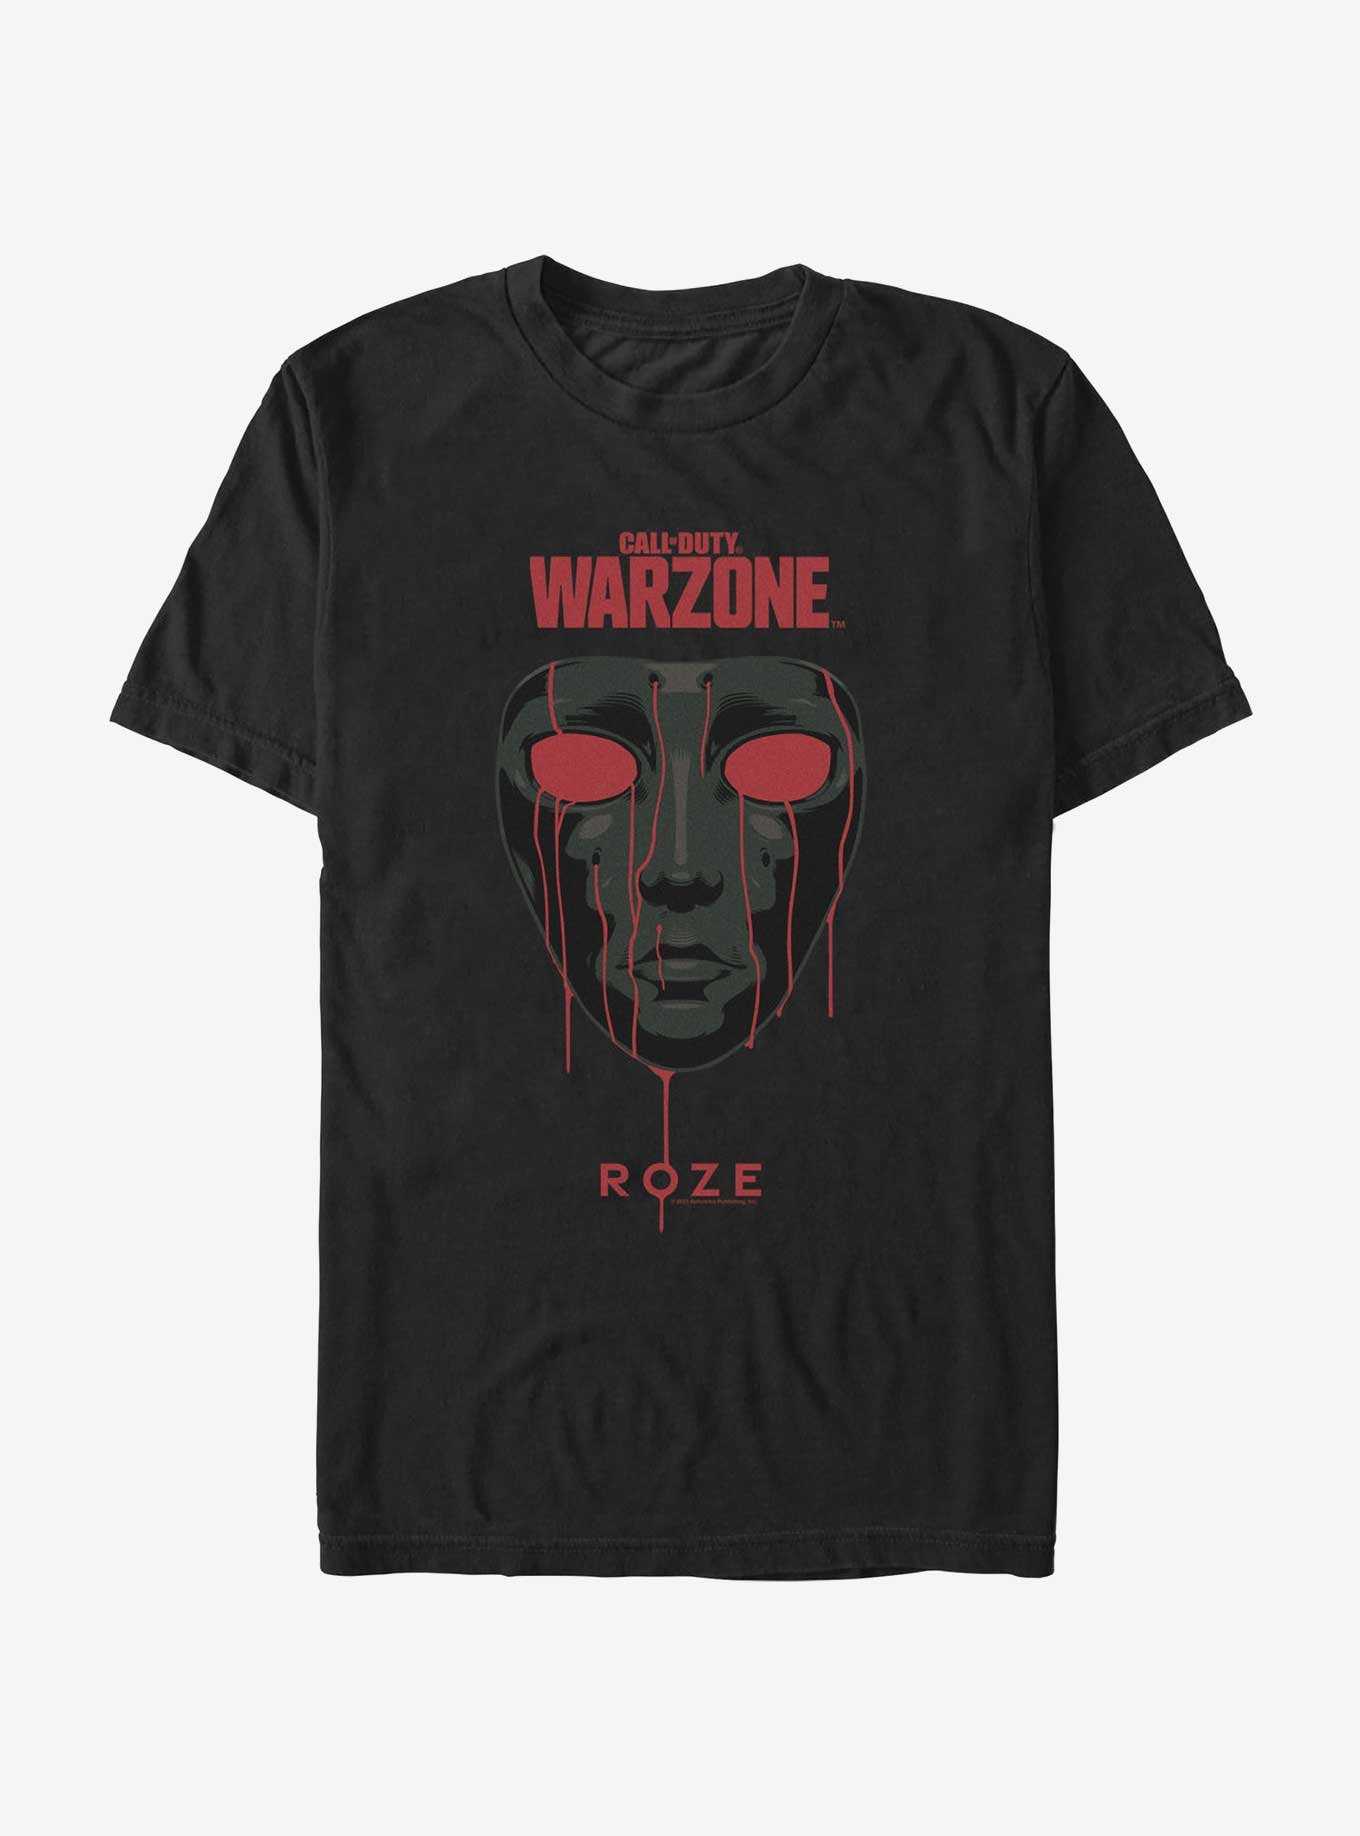 Call of Duty: Warzone Teary Roze T-Shirt, , hi-res